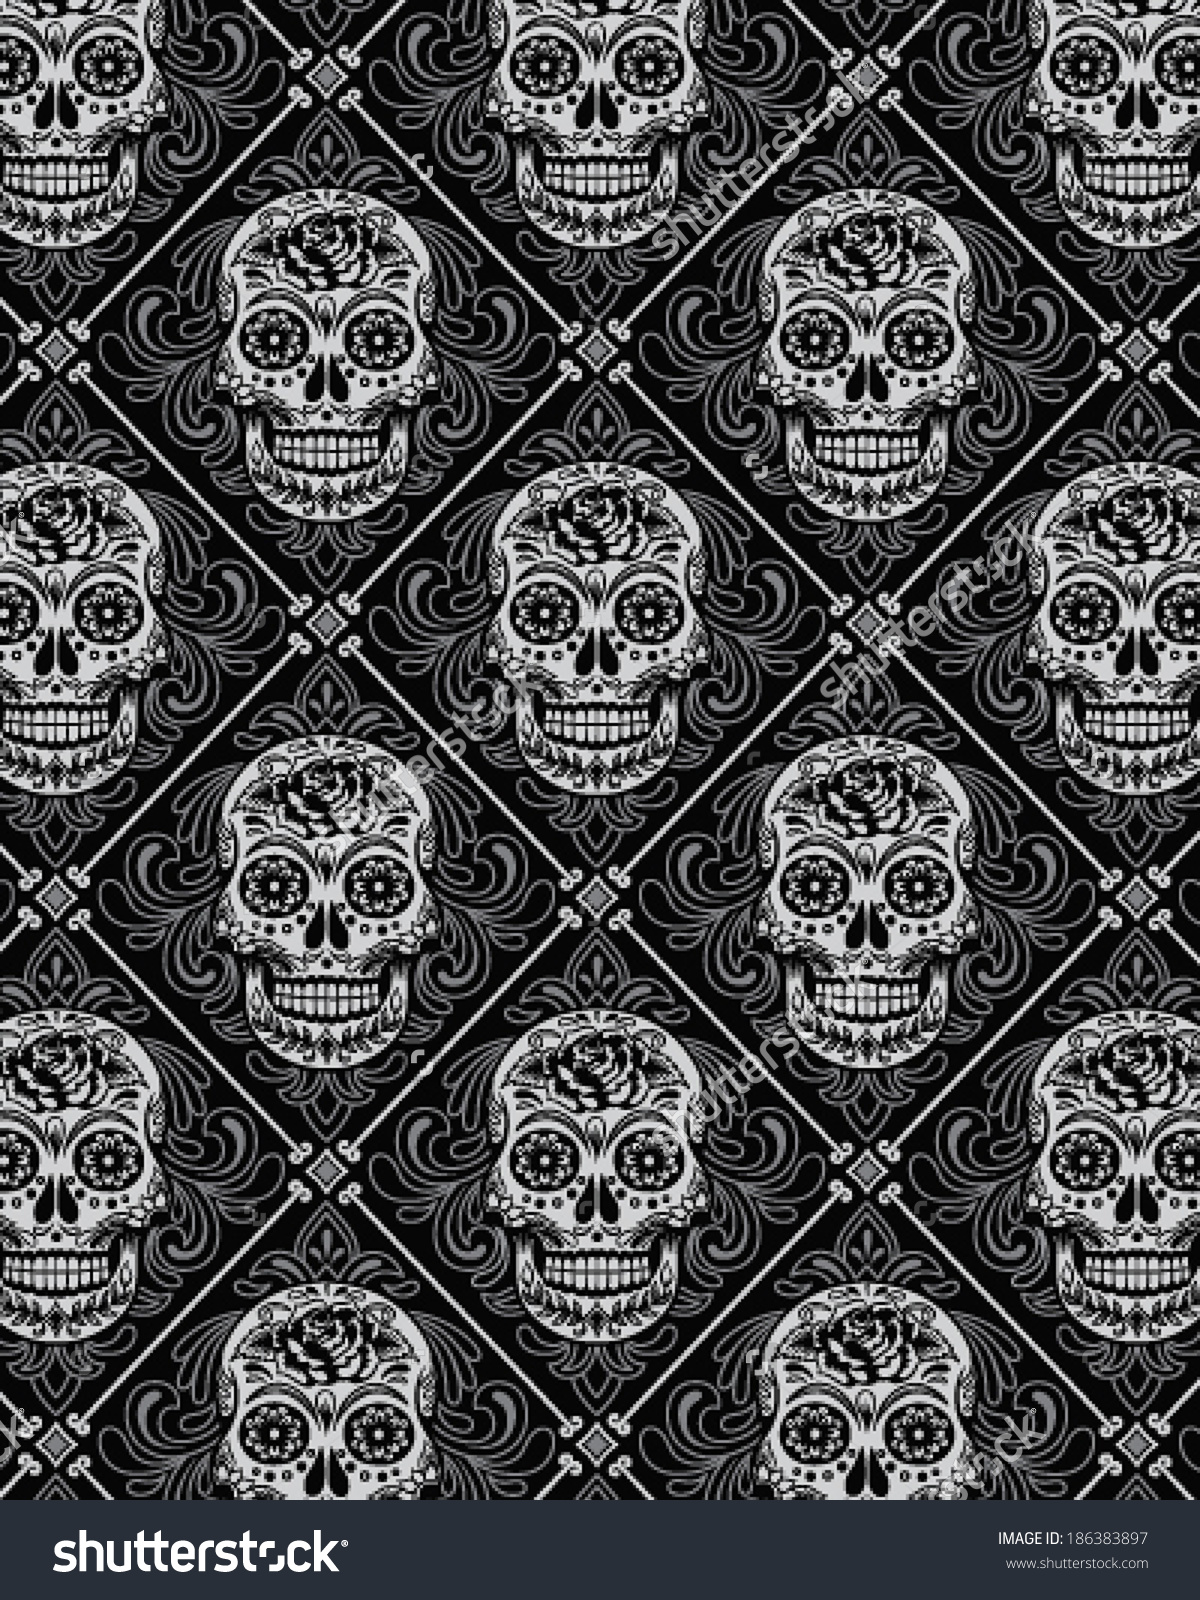 Day Of The Dead HD Widescreen Wallpaper Gsfdcy